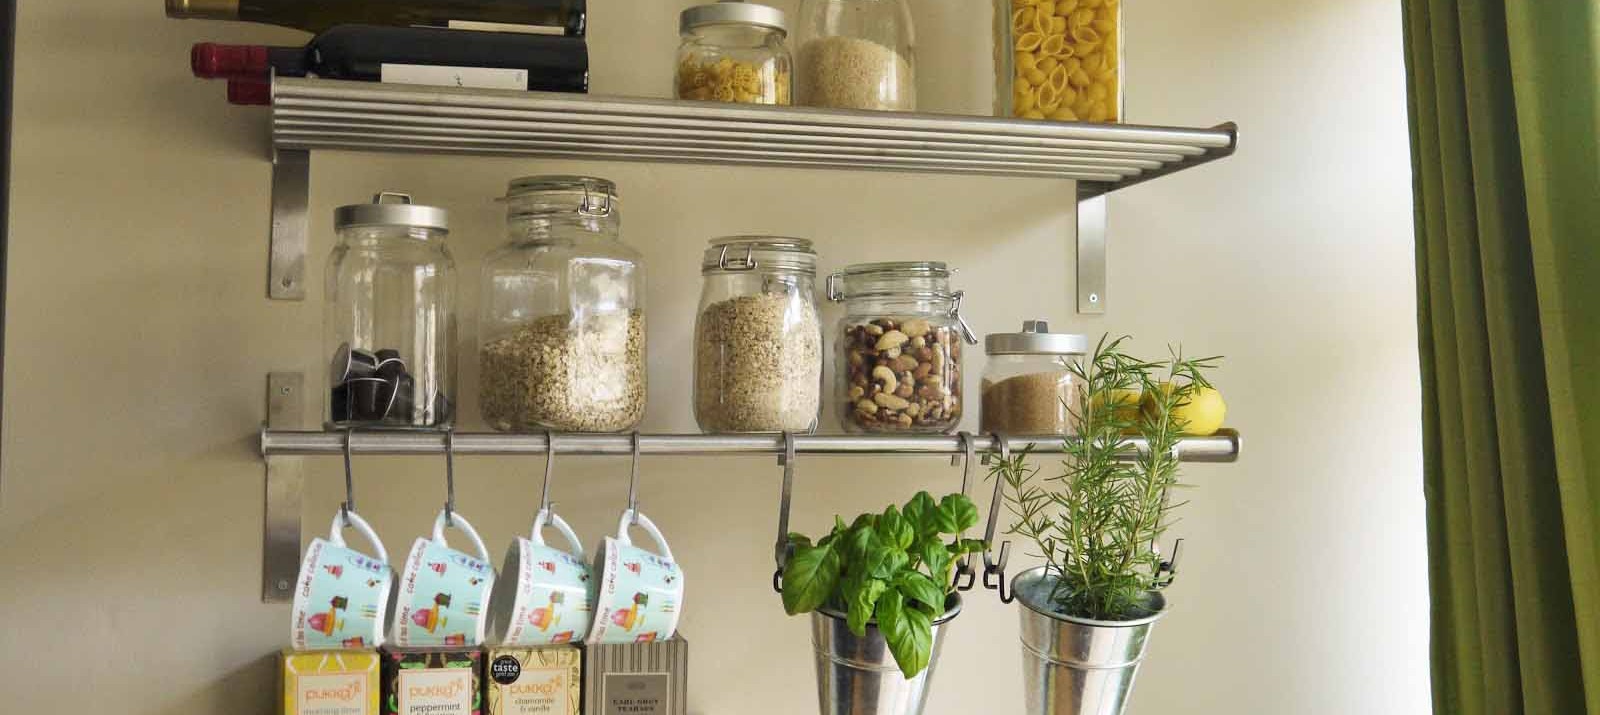 space saving storage ideas for kitchen 7 smart ways to save a ton of space in your small kitchen UWDPVLE